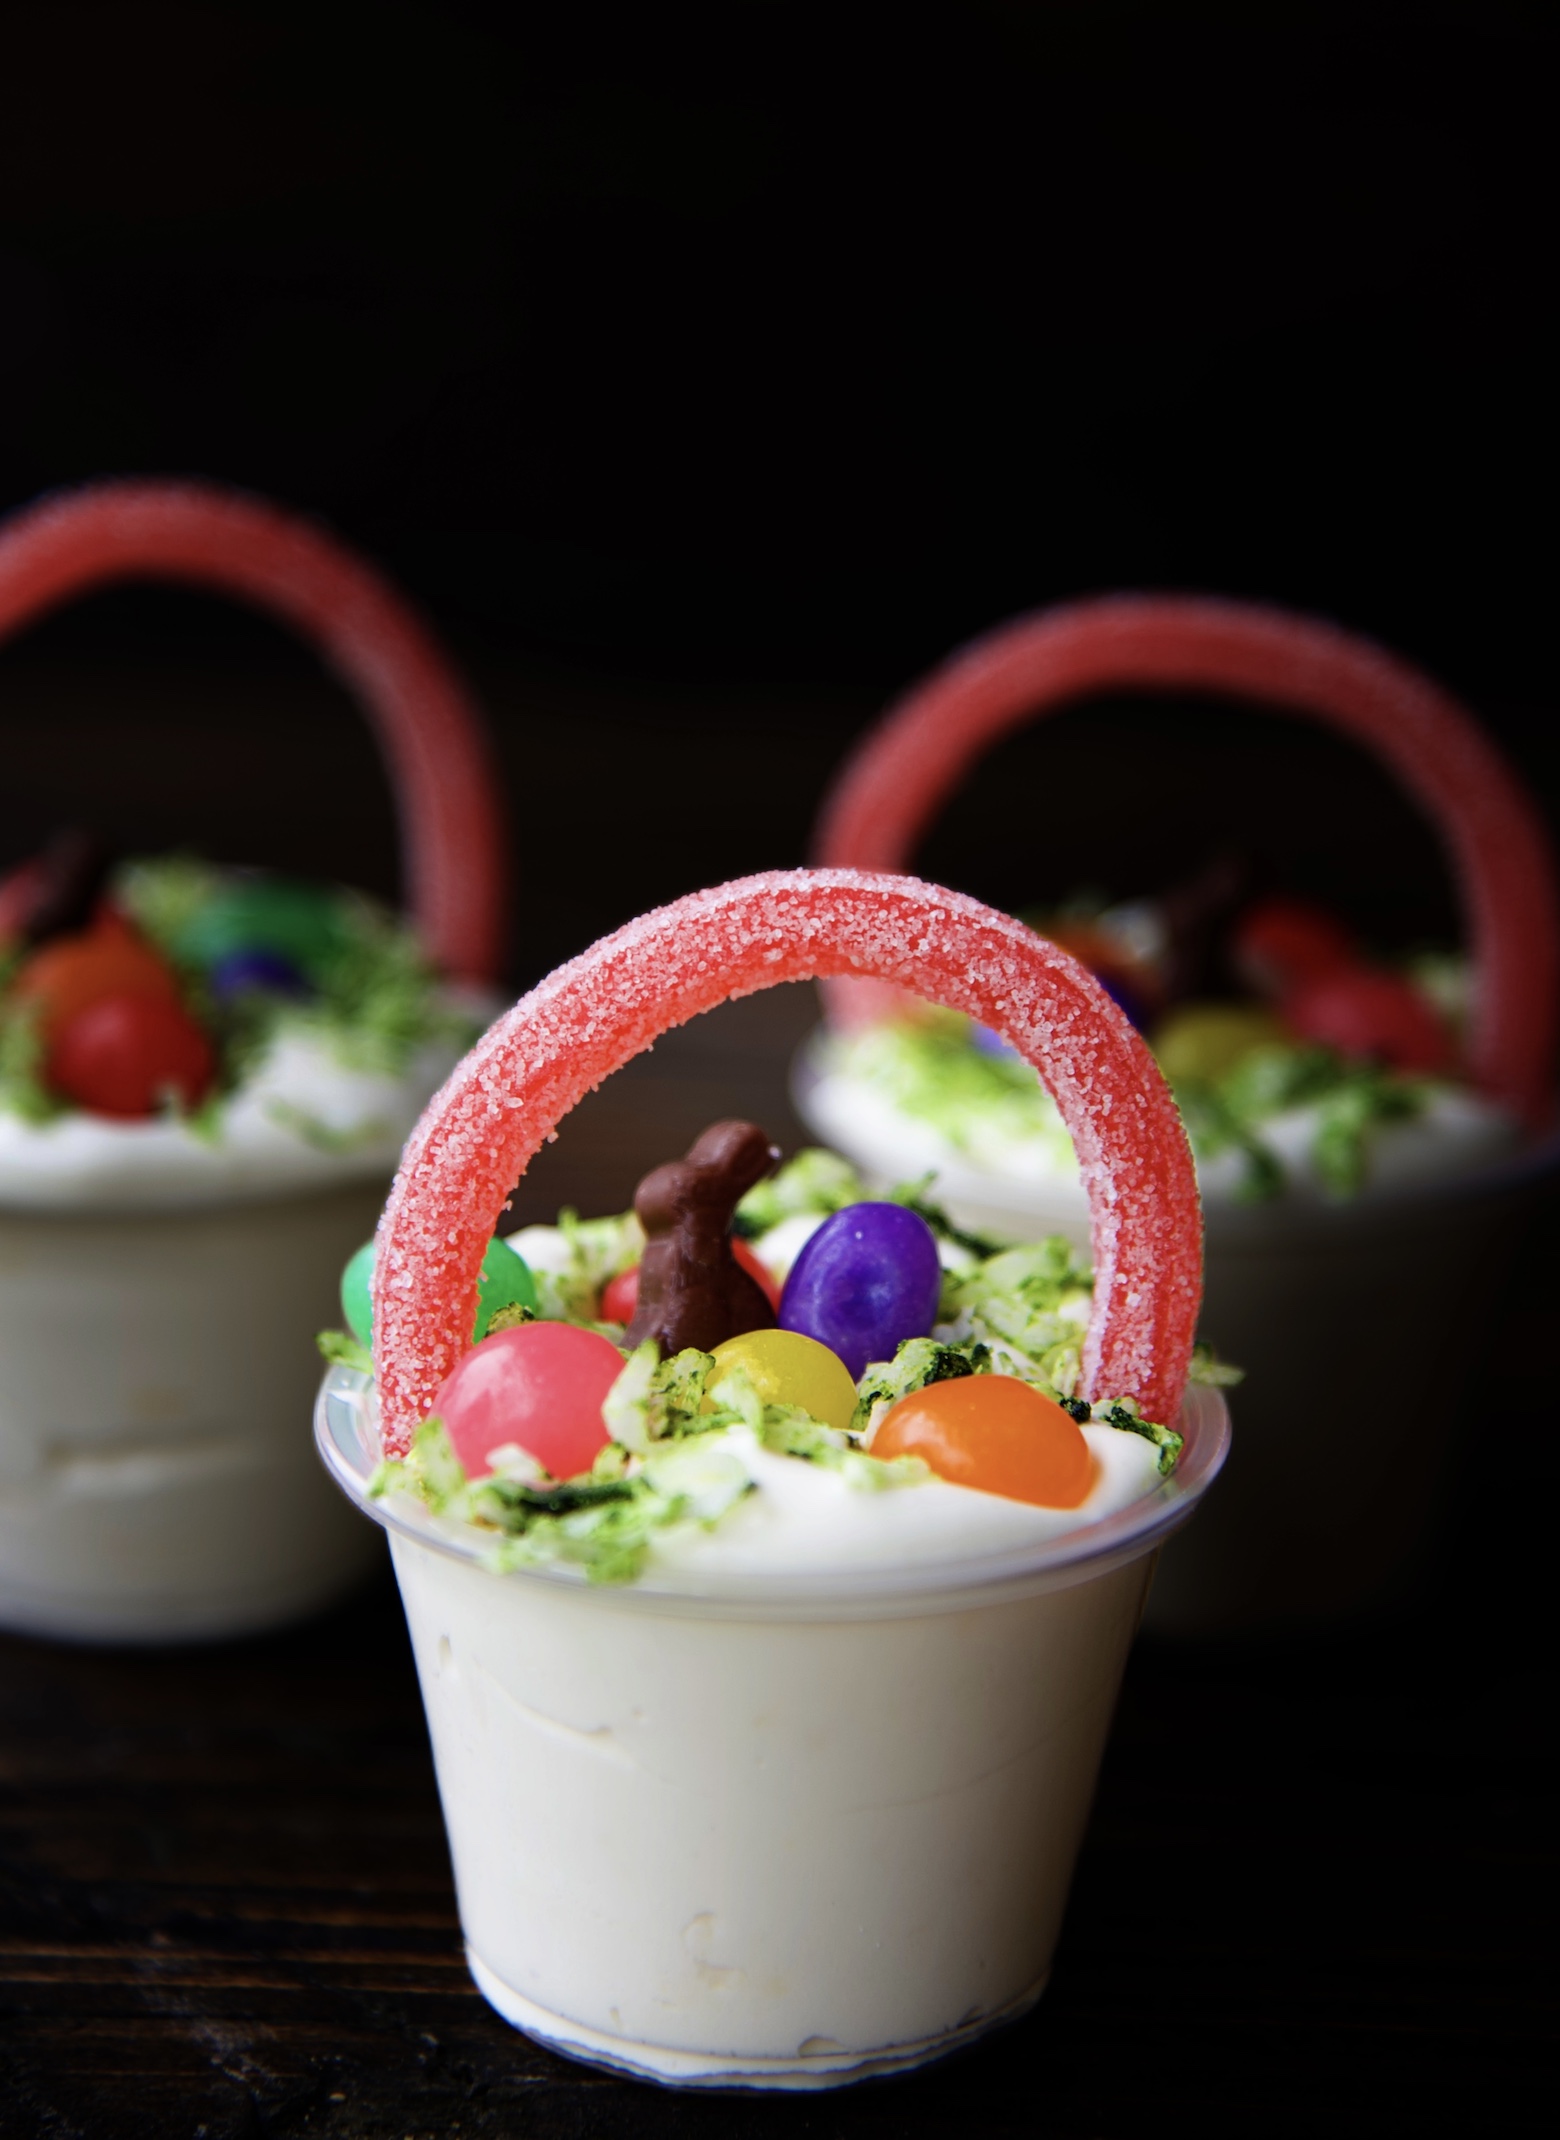 Side view of three pudding shots with with licorice handle, coconut grass, mini chocolate bunny, and mini jelly beans.  